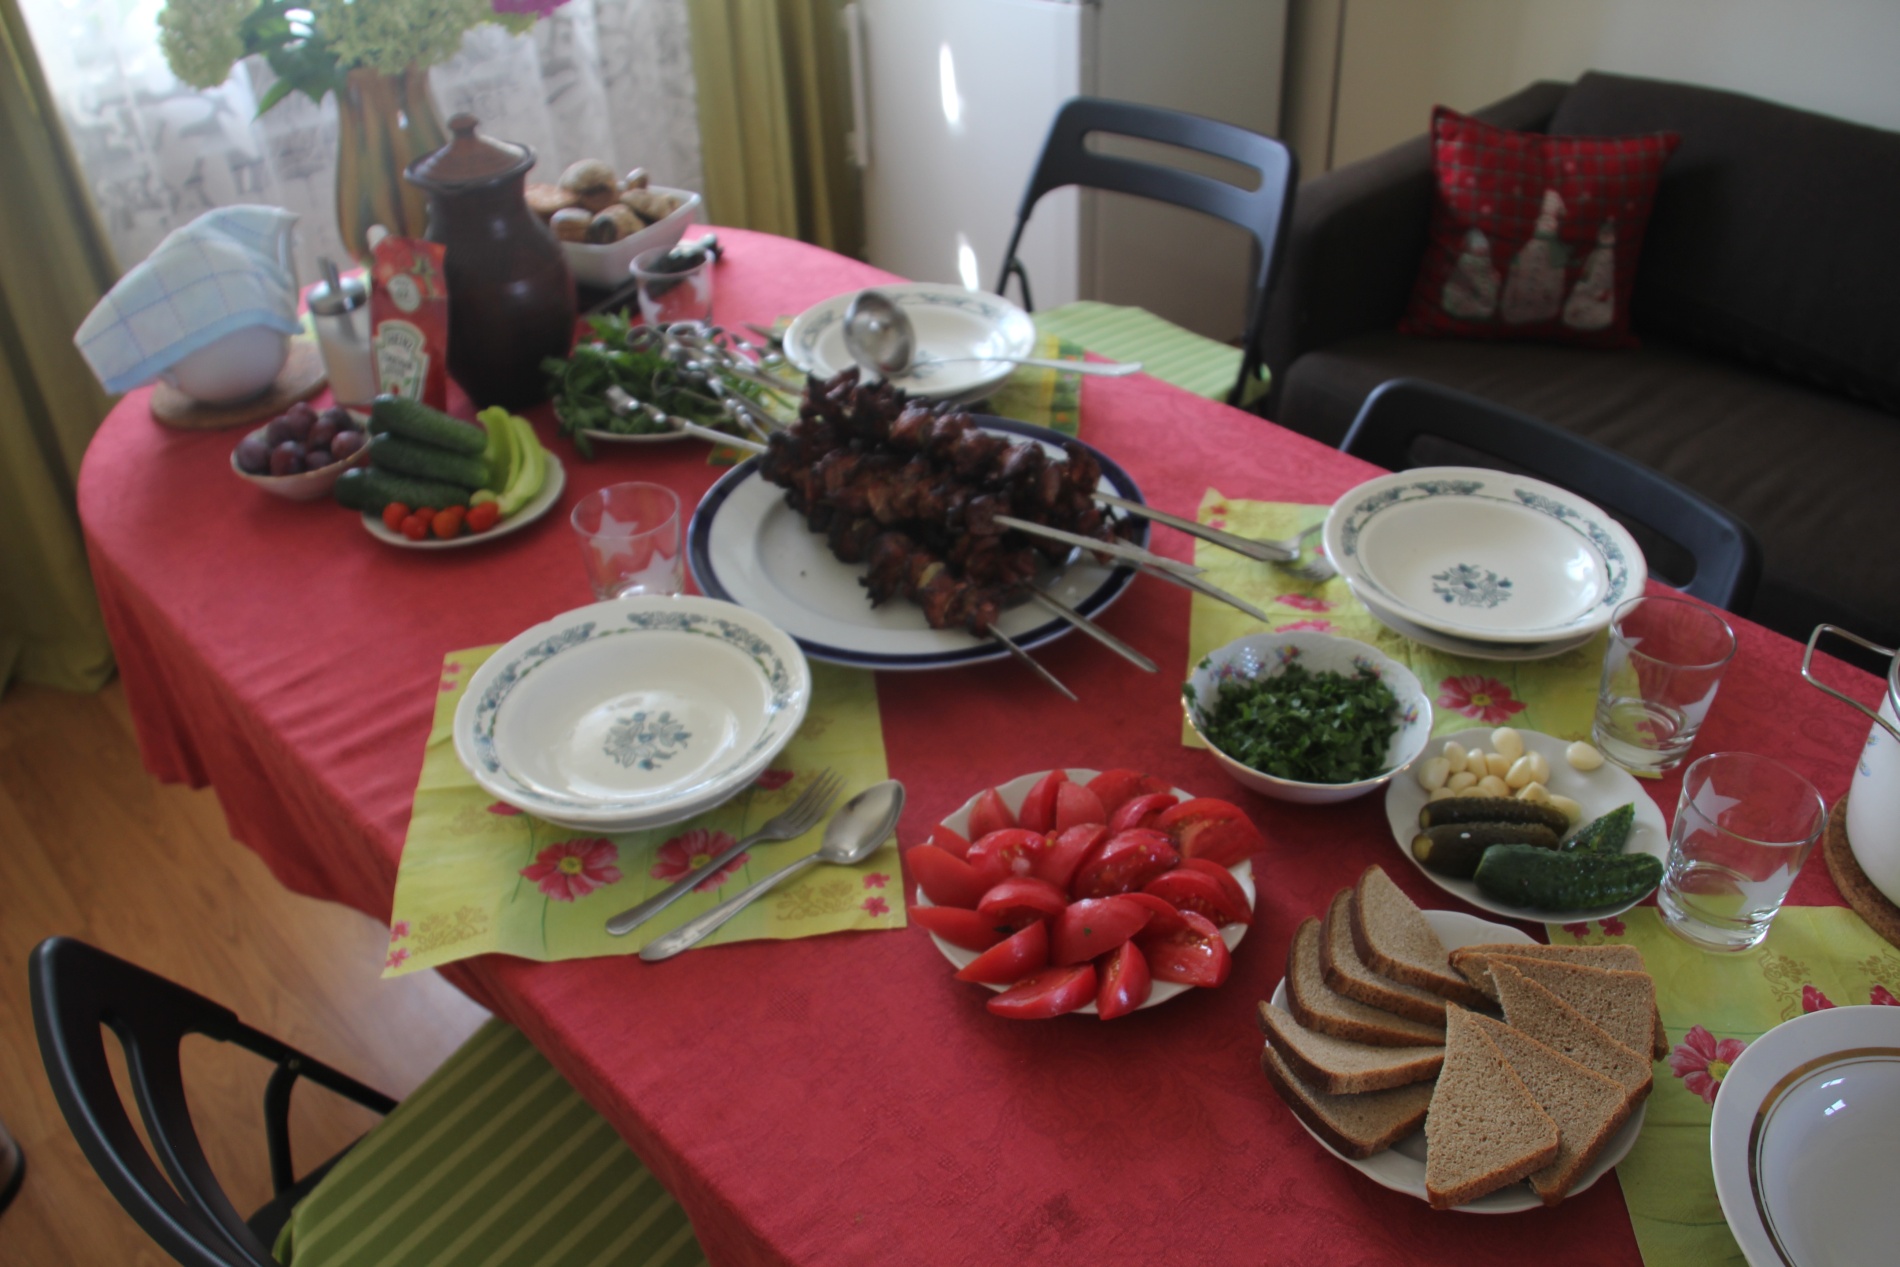 A Russian feast with shashlik waits to be eaten.